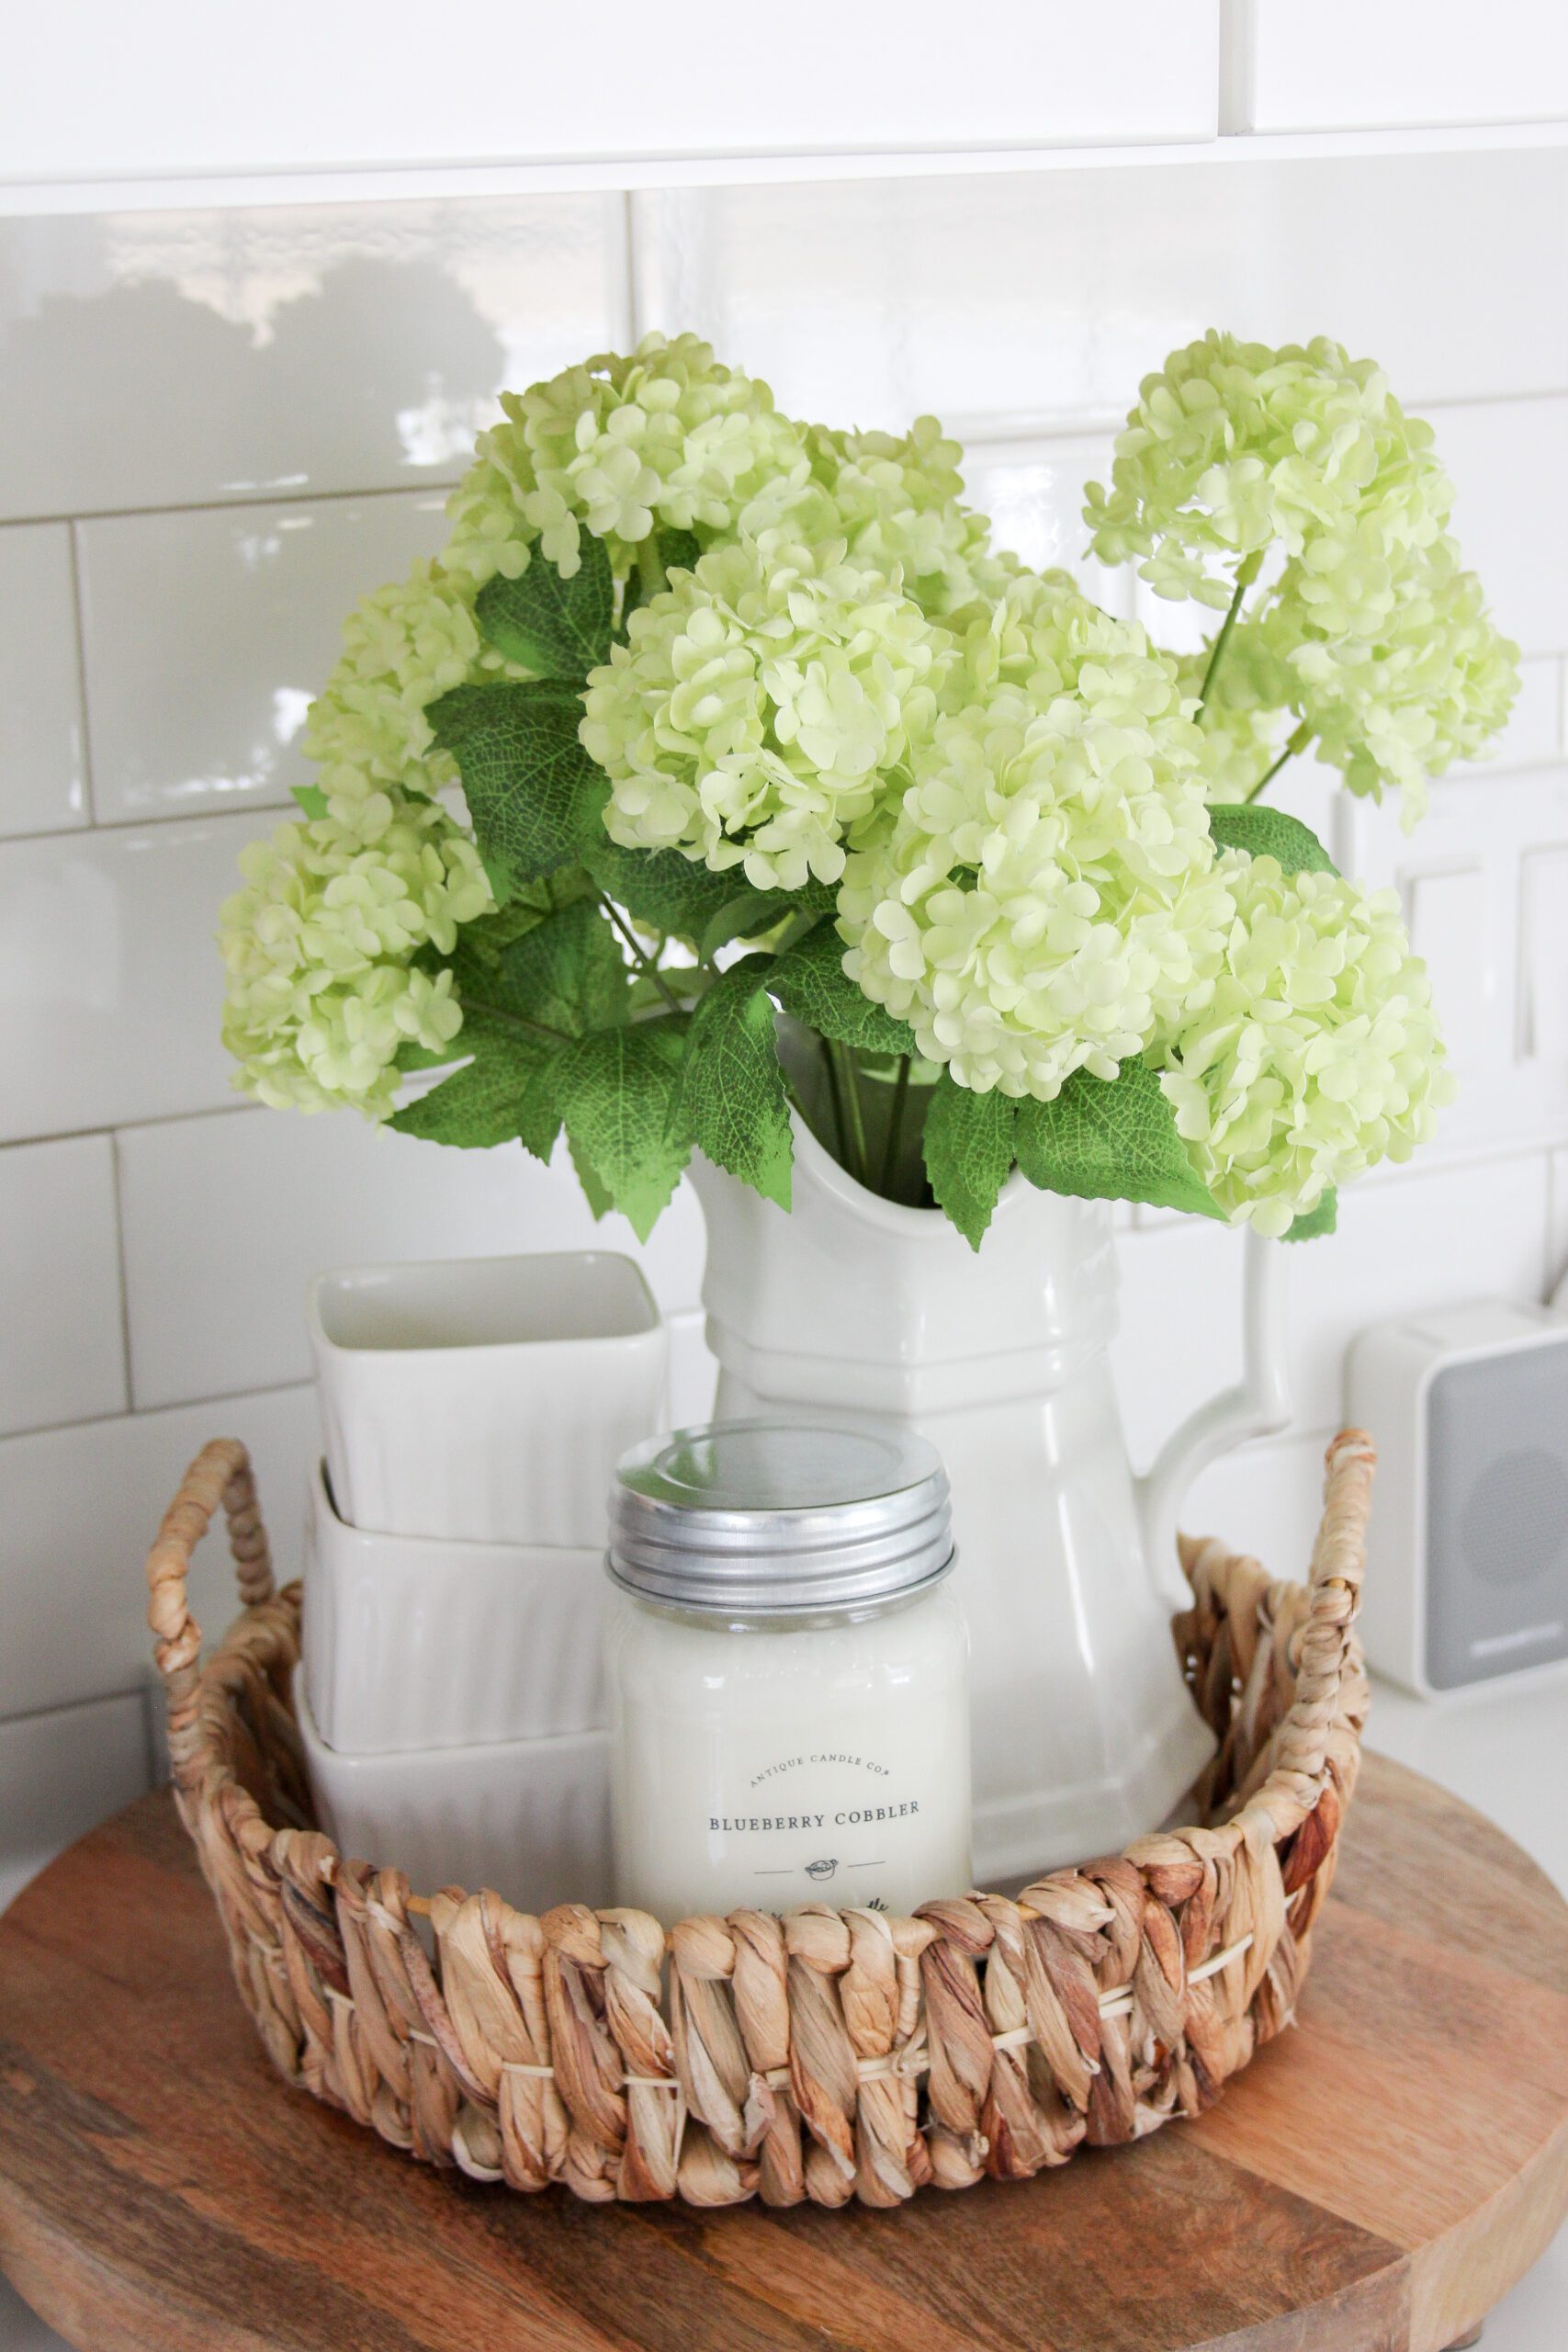 snowball hydrangeas in an ironstone pitcher with scalloped square ramekins, a blueberry cobbler candle, in a whicker seagrass basket. 